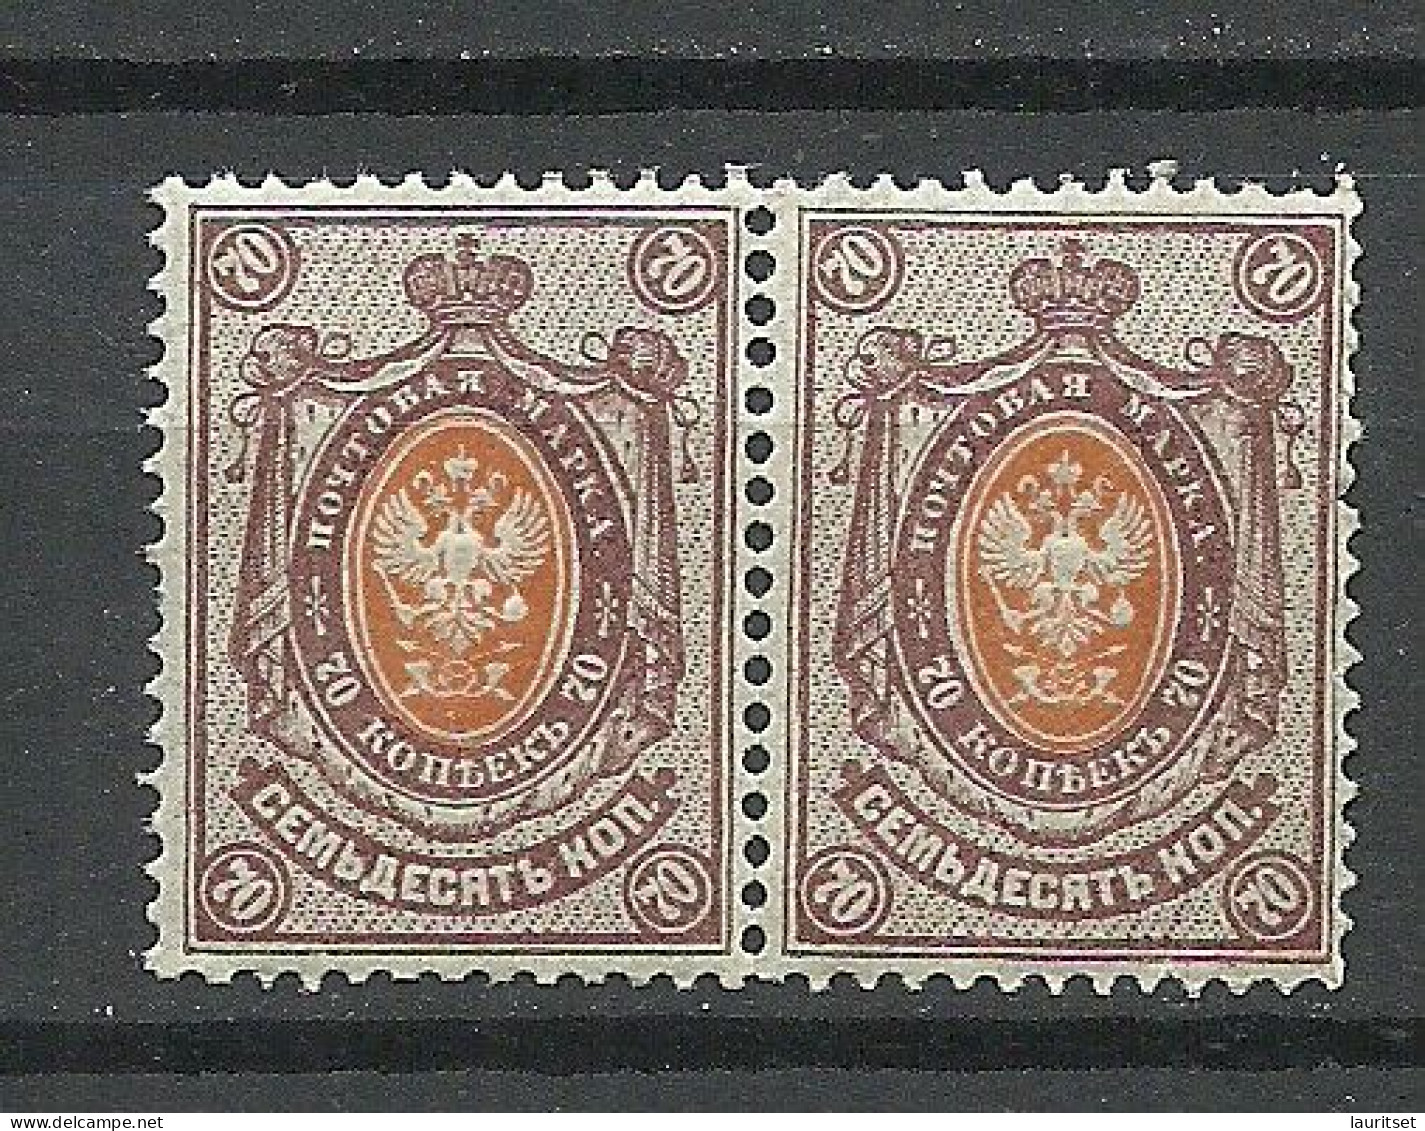 Russia Russland 1909 Michel 76 I A A As Pair MNH - Nuovi